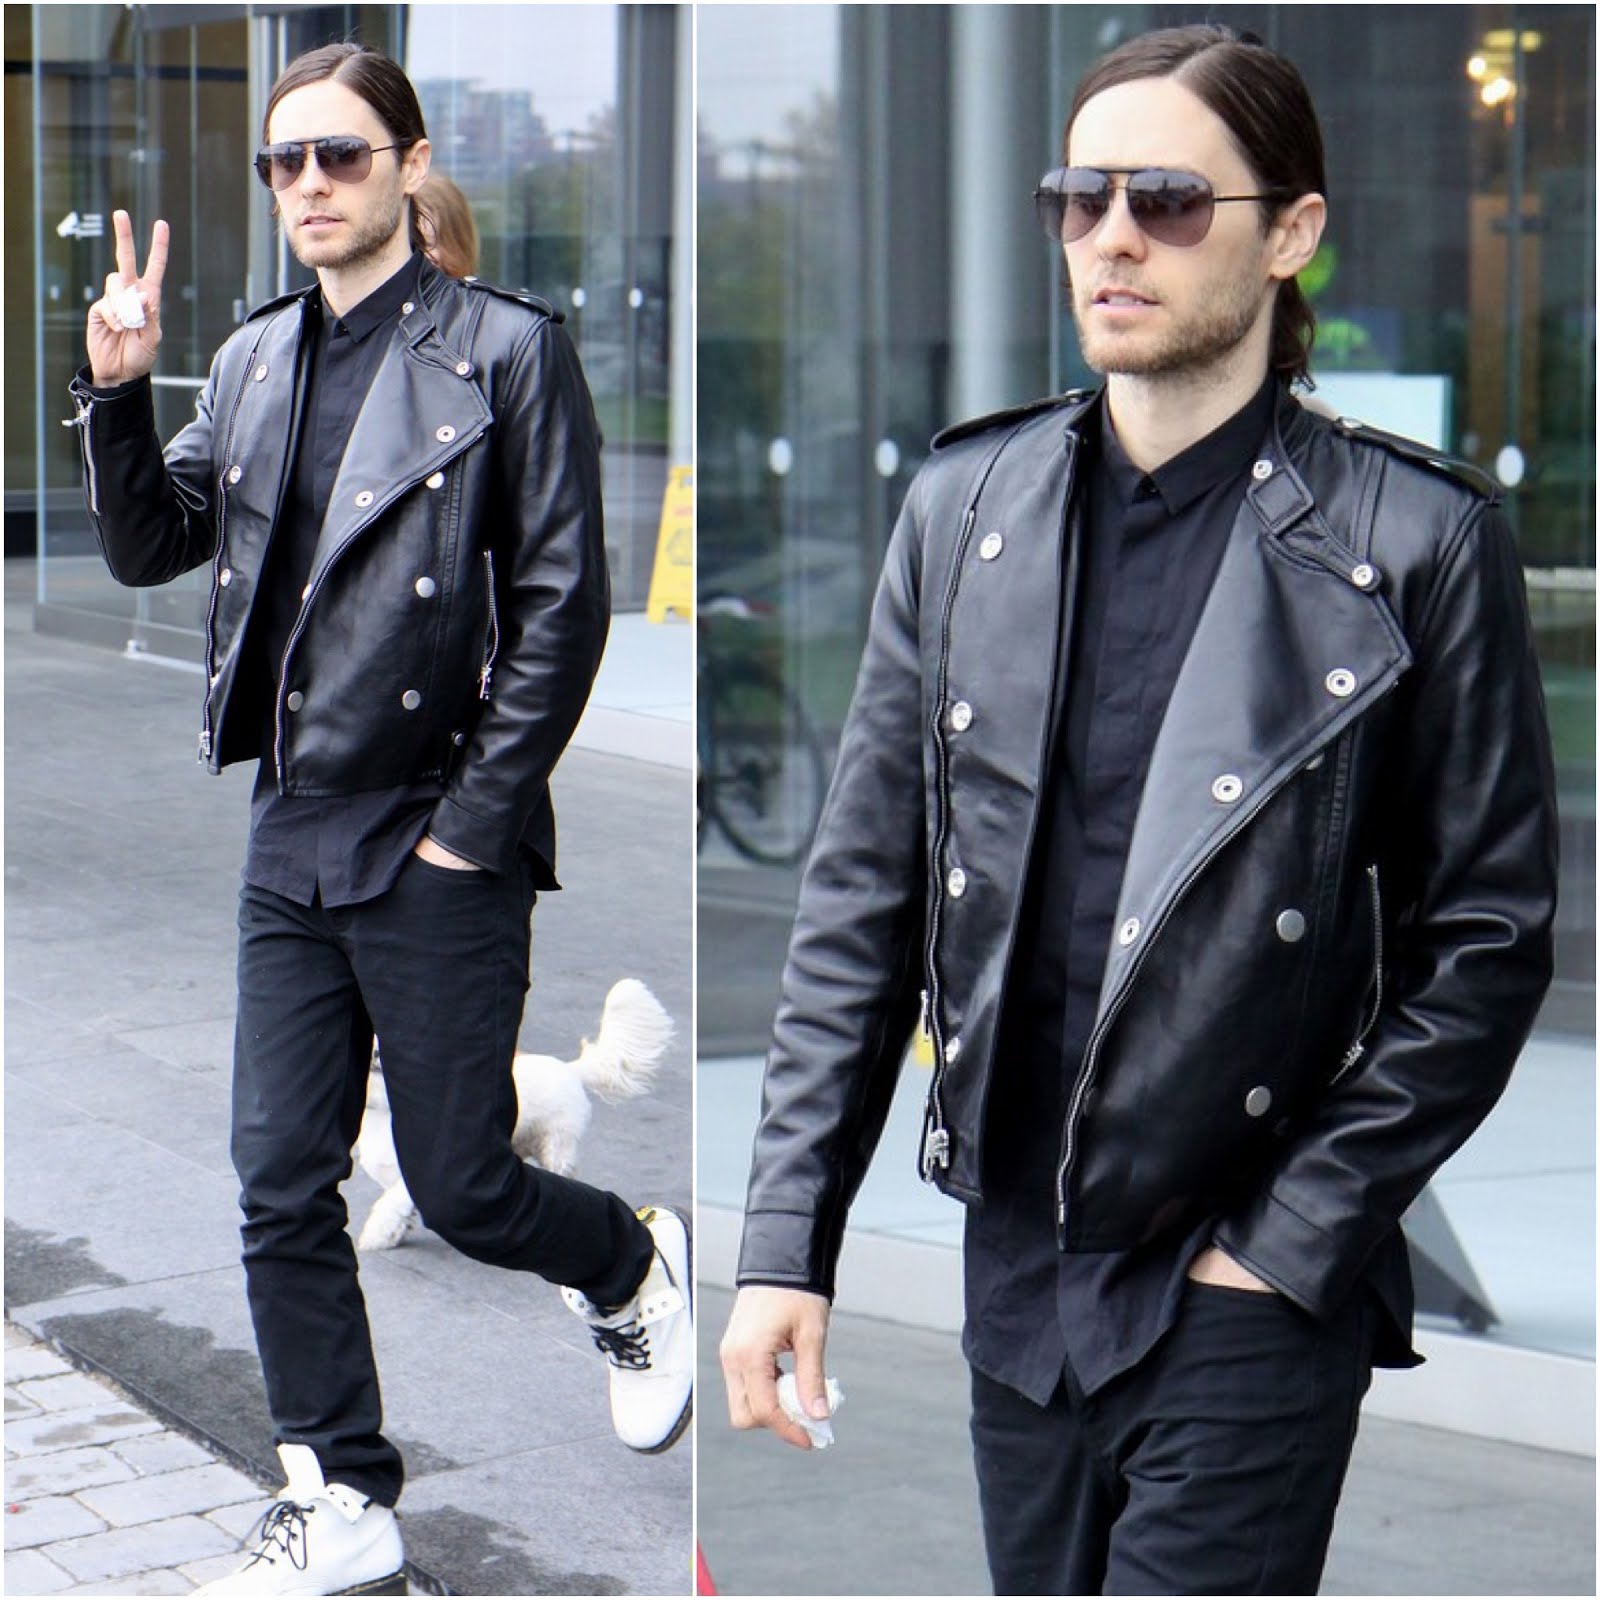 What's he wearing?: Jared Leto in Saint Laurent - New York Street Style